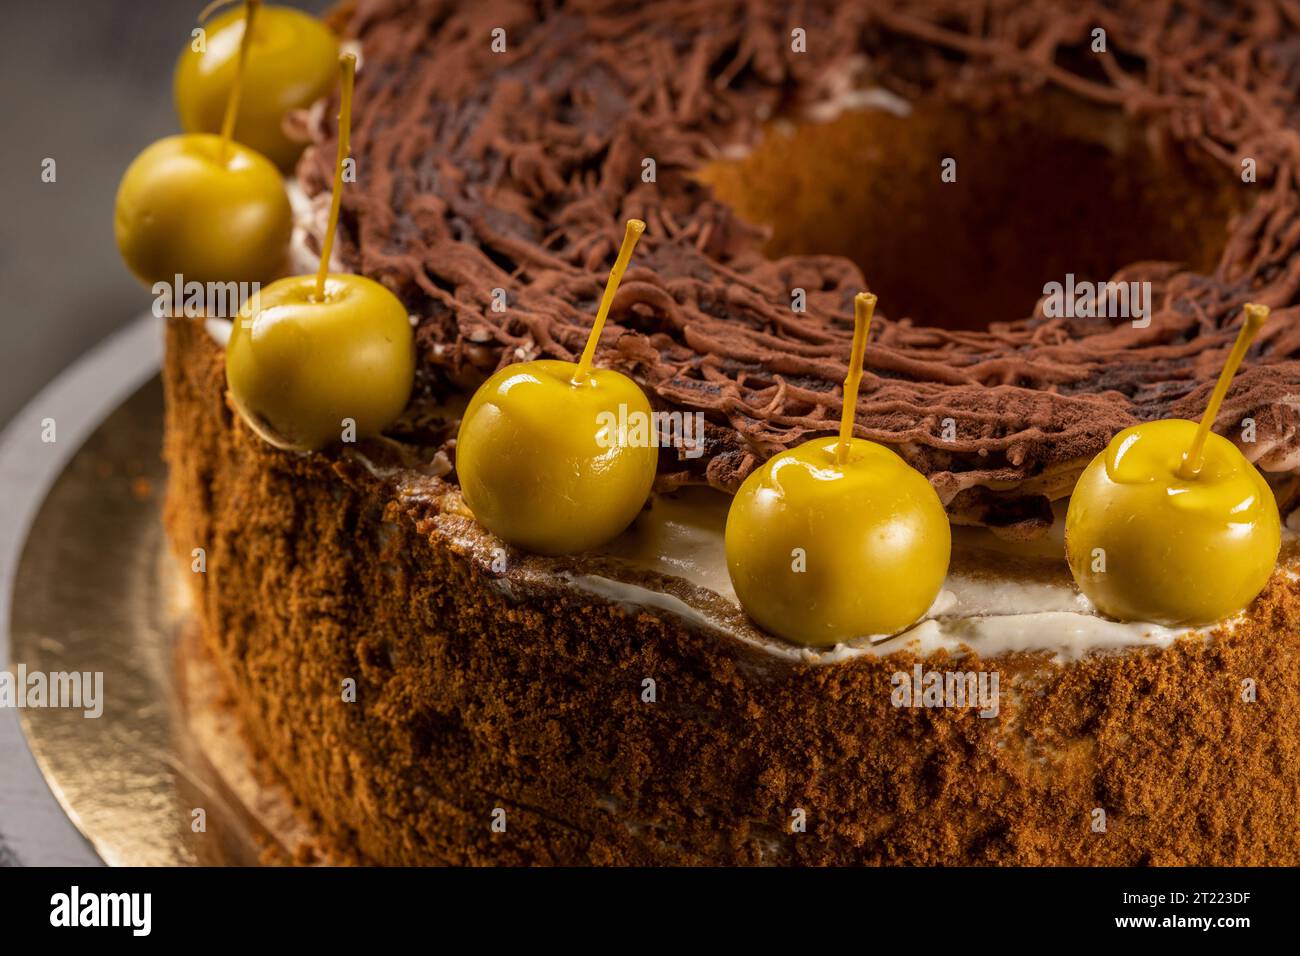 Homemade chocolate cake sweet pastry dessert with brown icing, green decorative cherries. Dark food photo, rustic style. Stock Photo